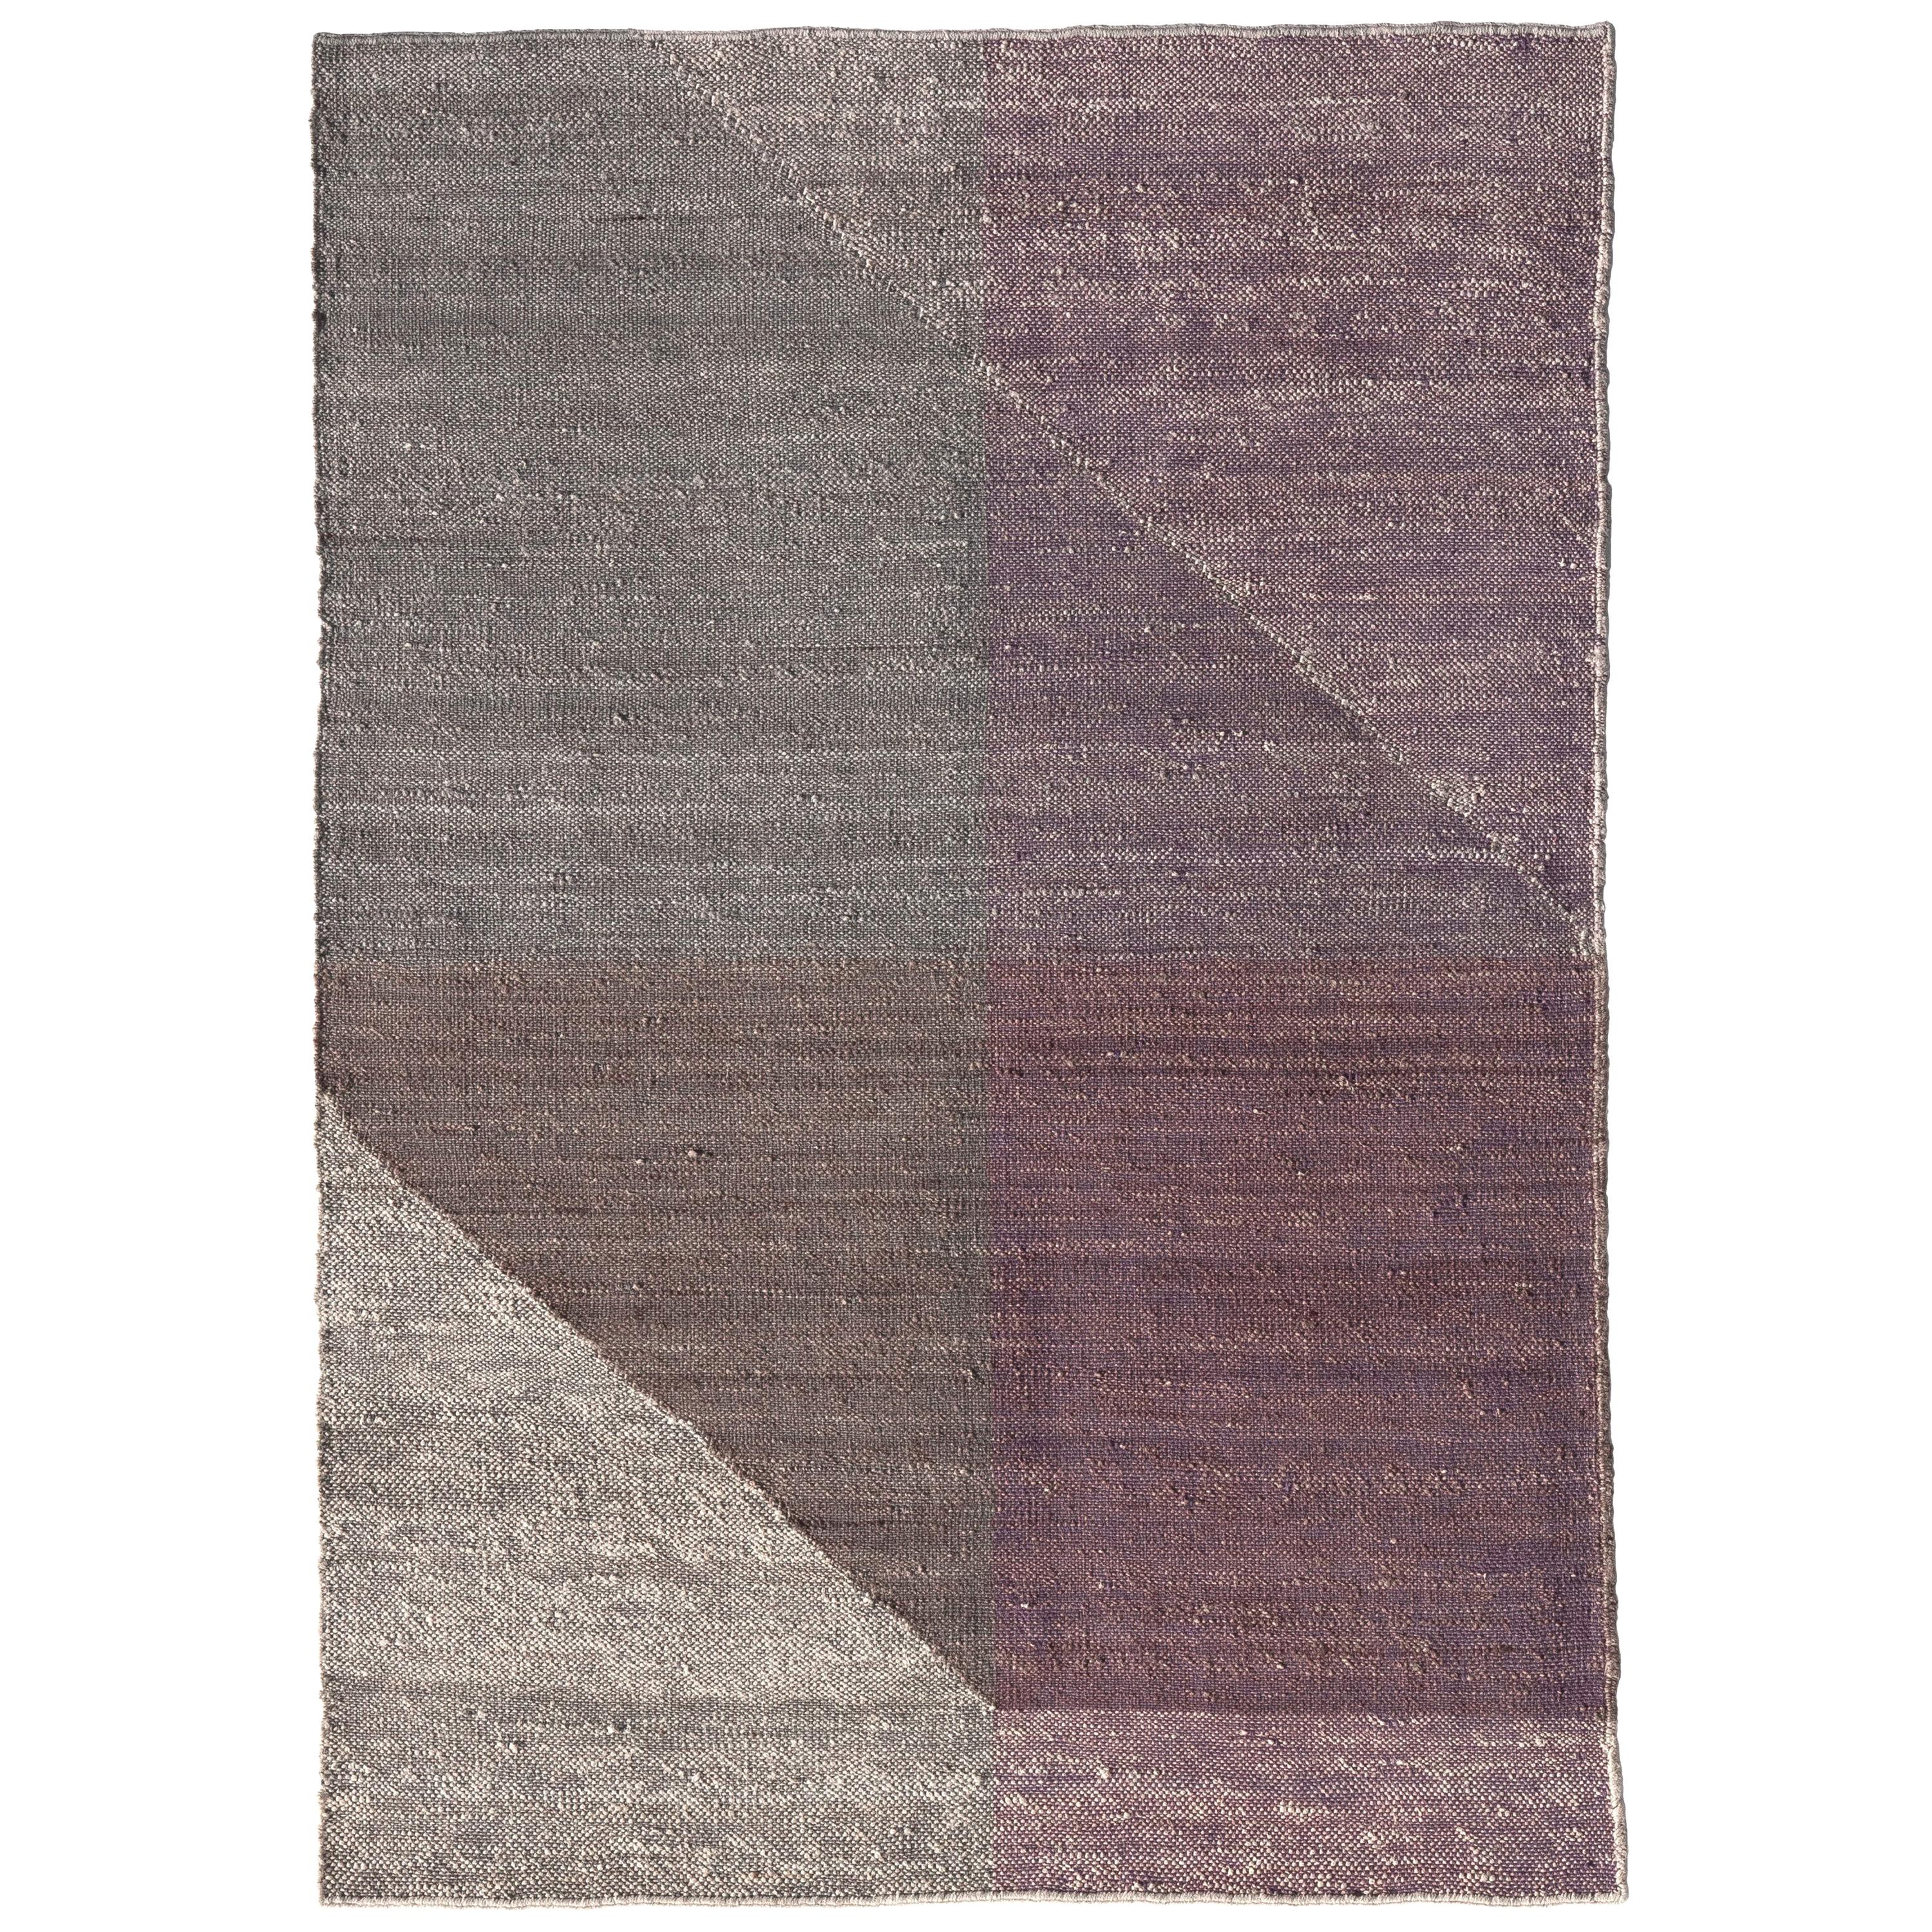 Nanimarquina Capas 4 Rug in Violet by Mathias Hahn, Small